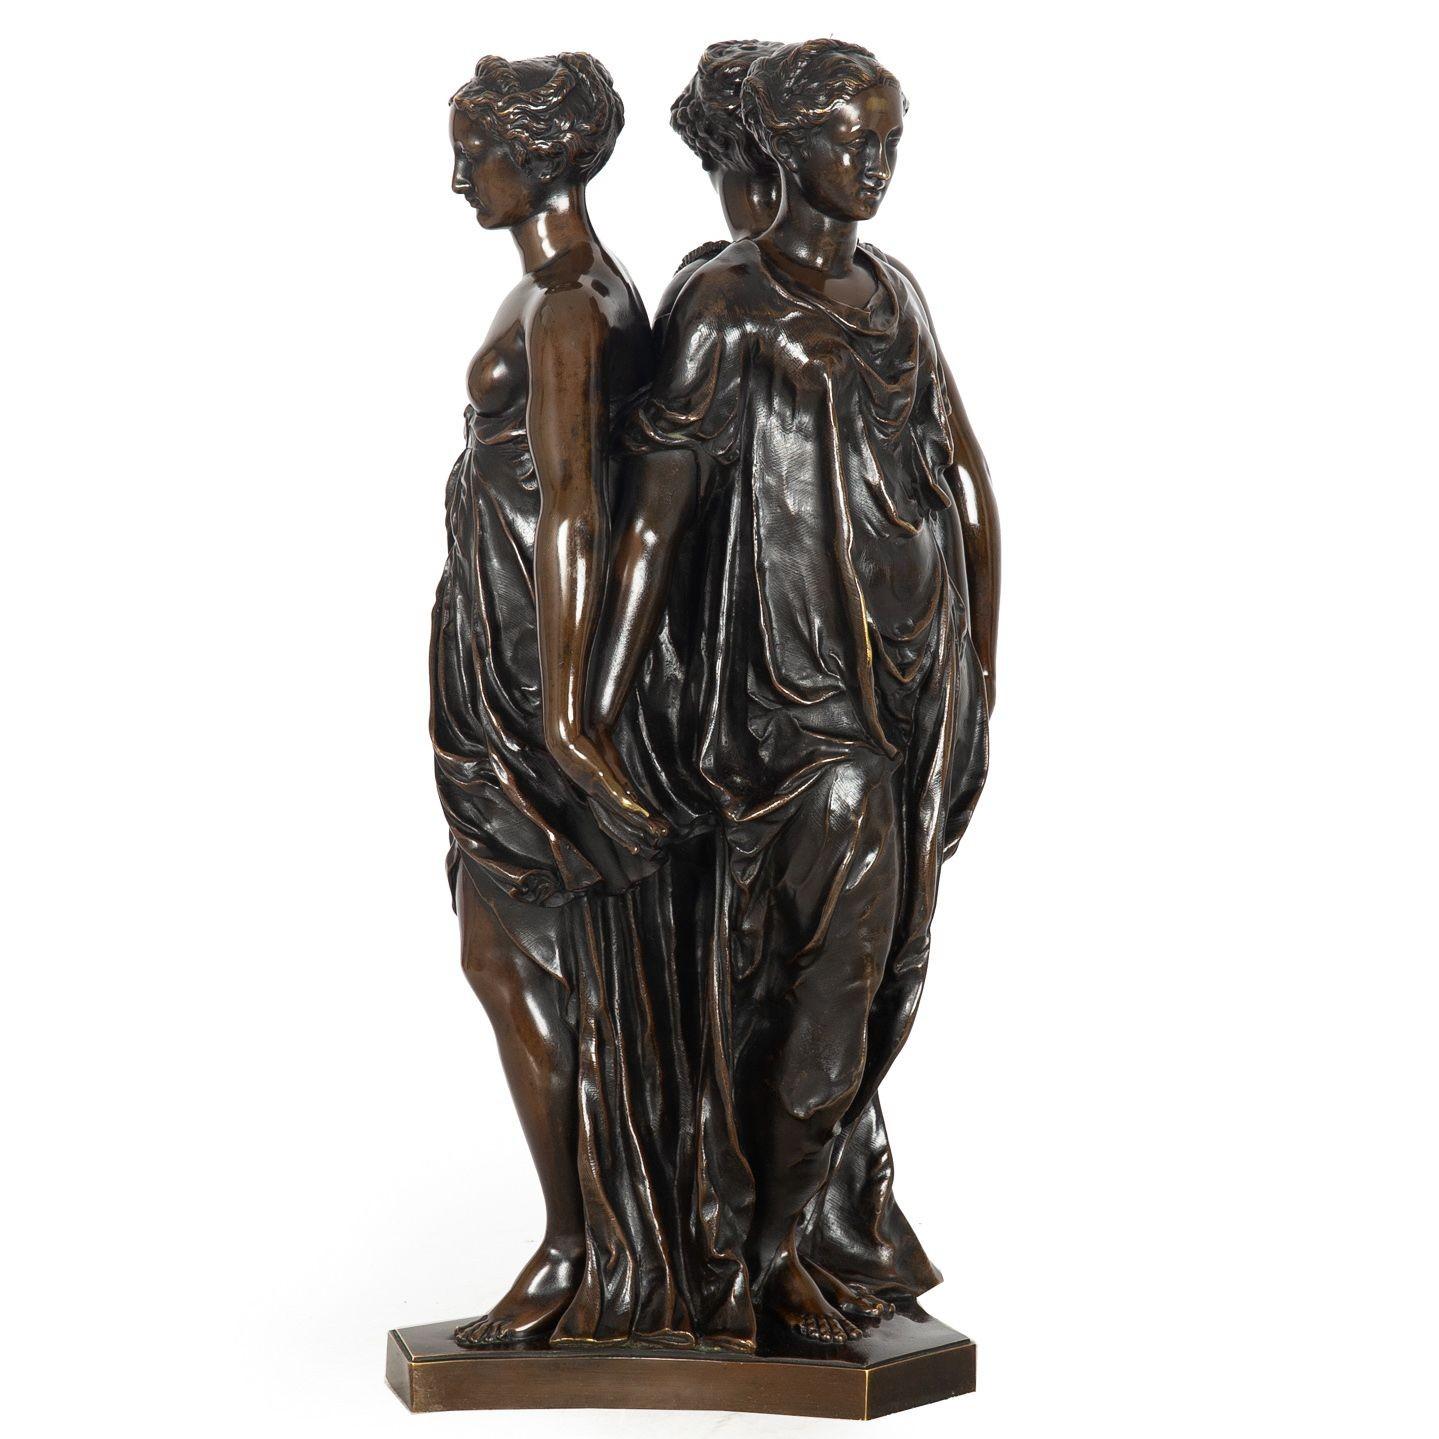 French Antique Bronze Sculpture “Three Graces” after Germain Pilon In Good Condition For Sale In Shippensburg, PA